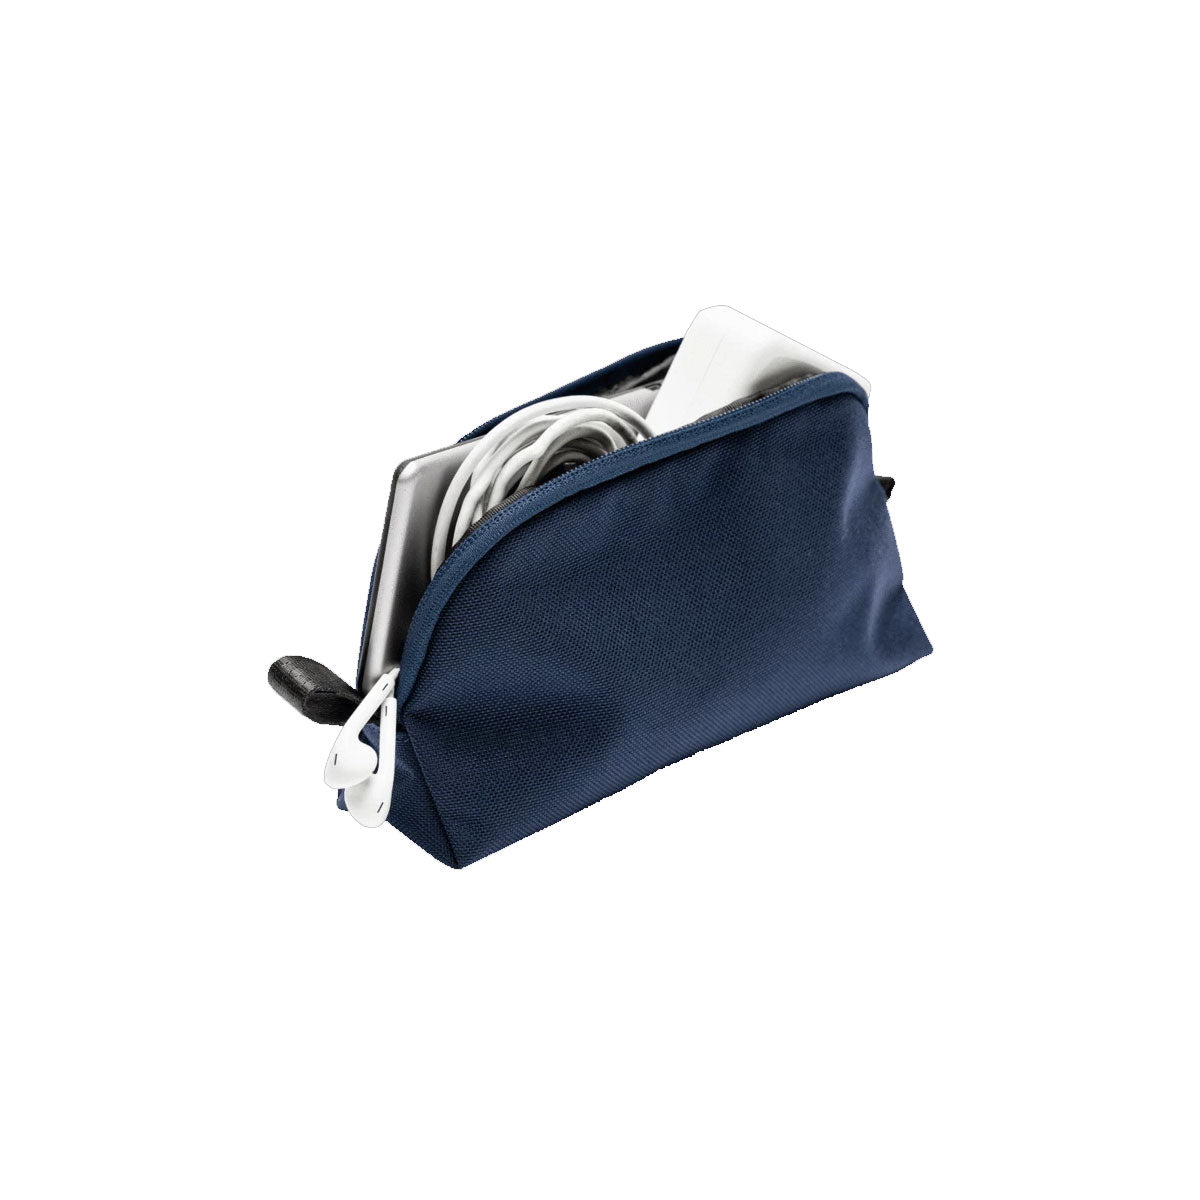 Able Carry : The Daily Stash Pouch : Cordura Navy